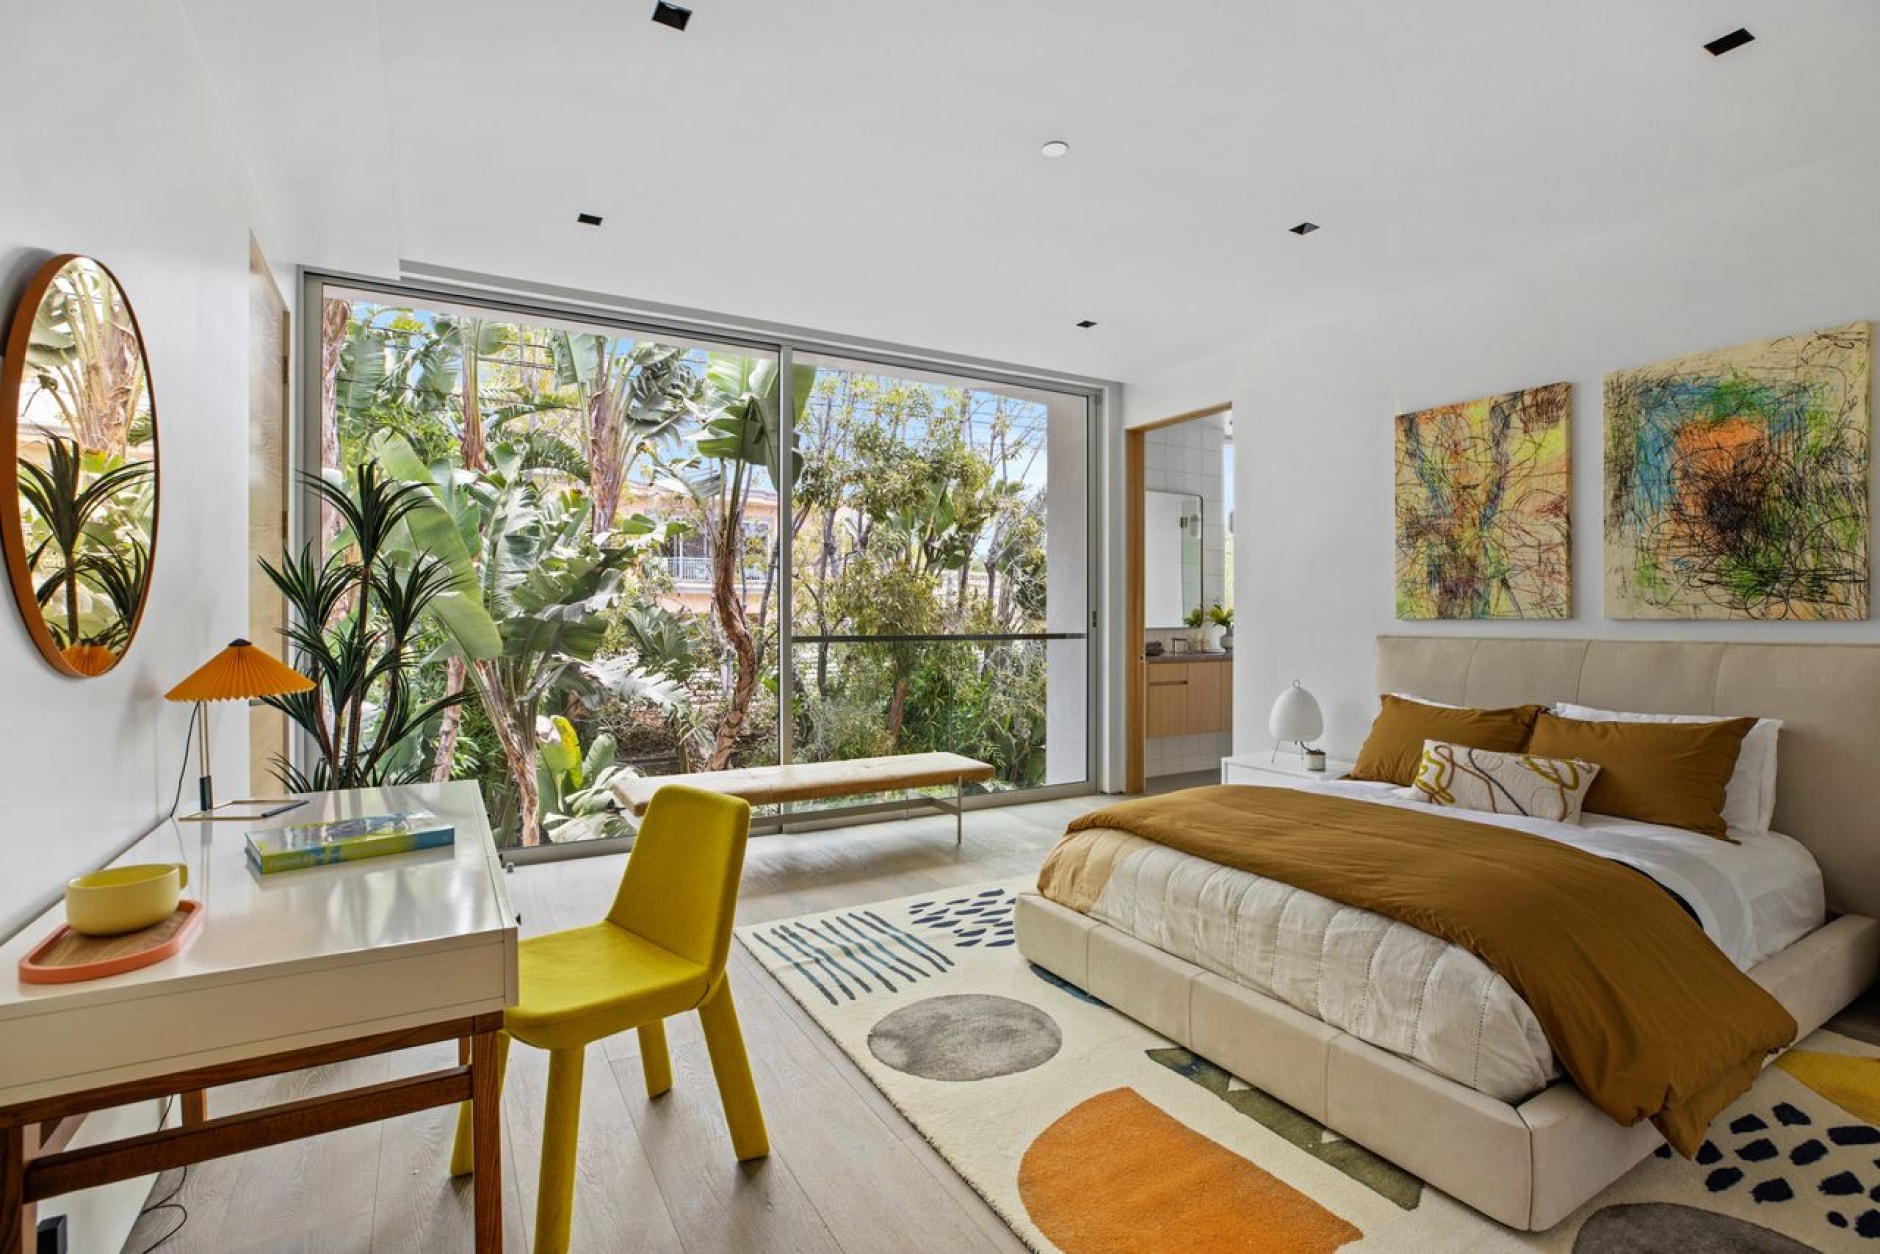 Vibrant bedroom with harmonious palette, colorful decor, desk space, circular mirror, and nature-filled backdrop.